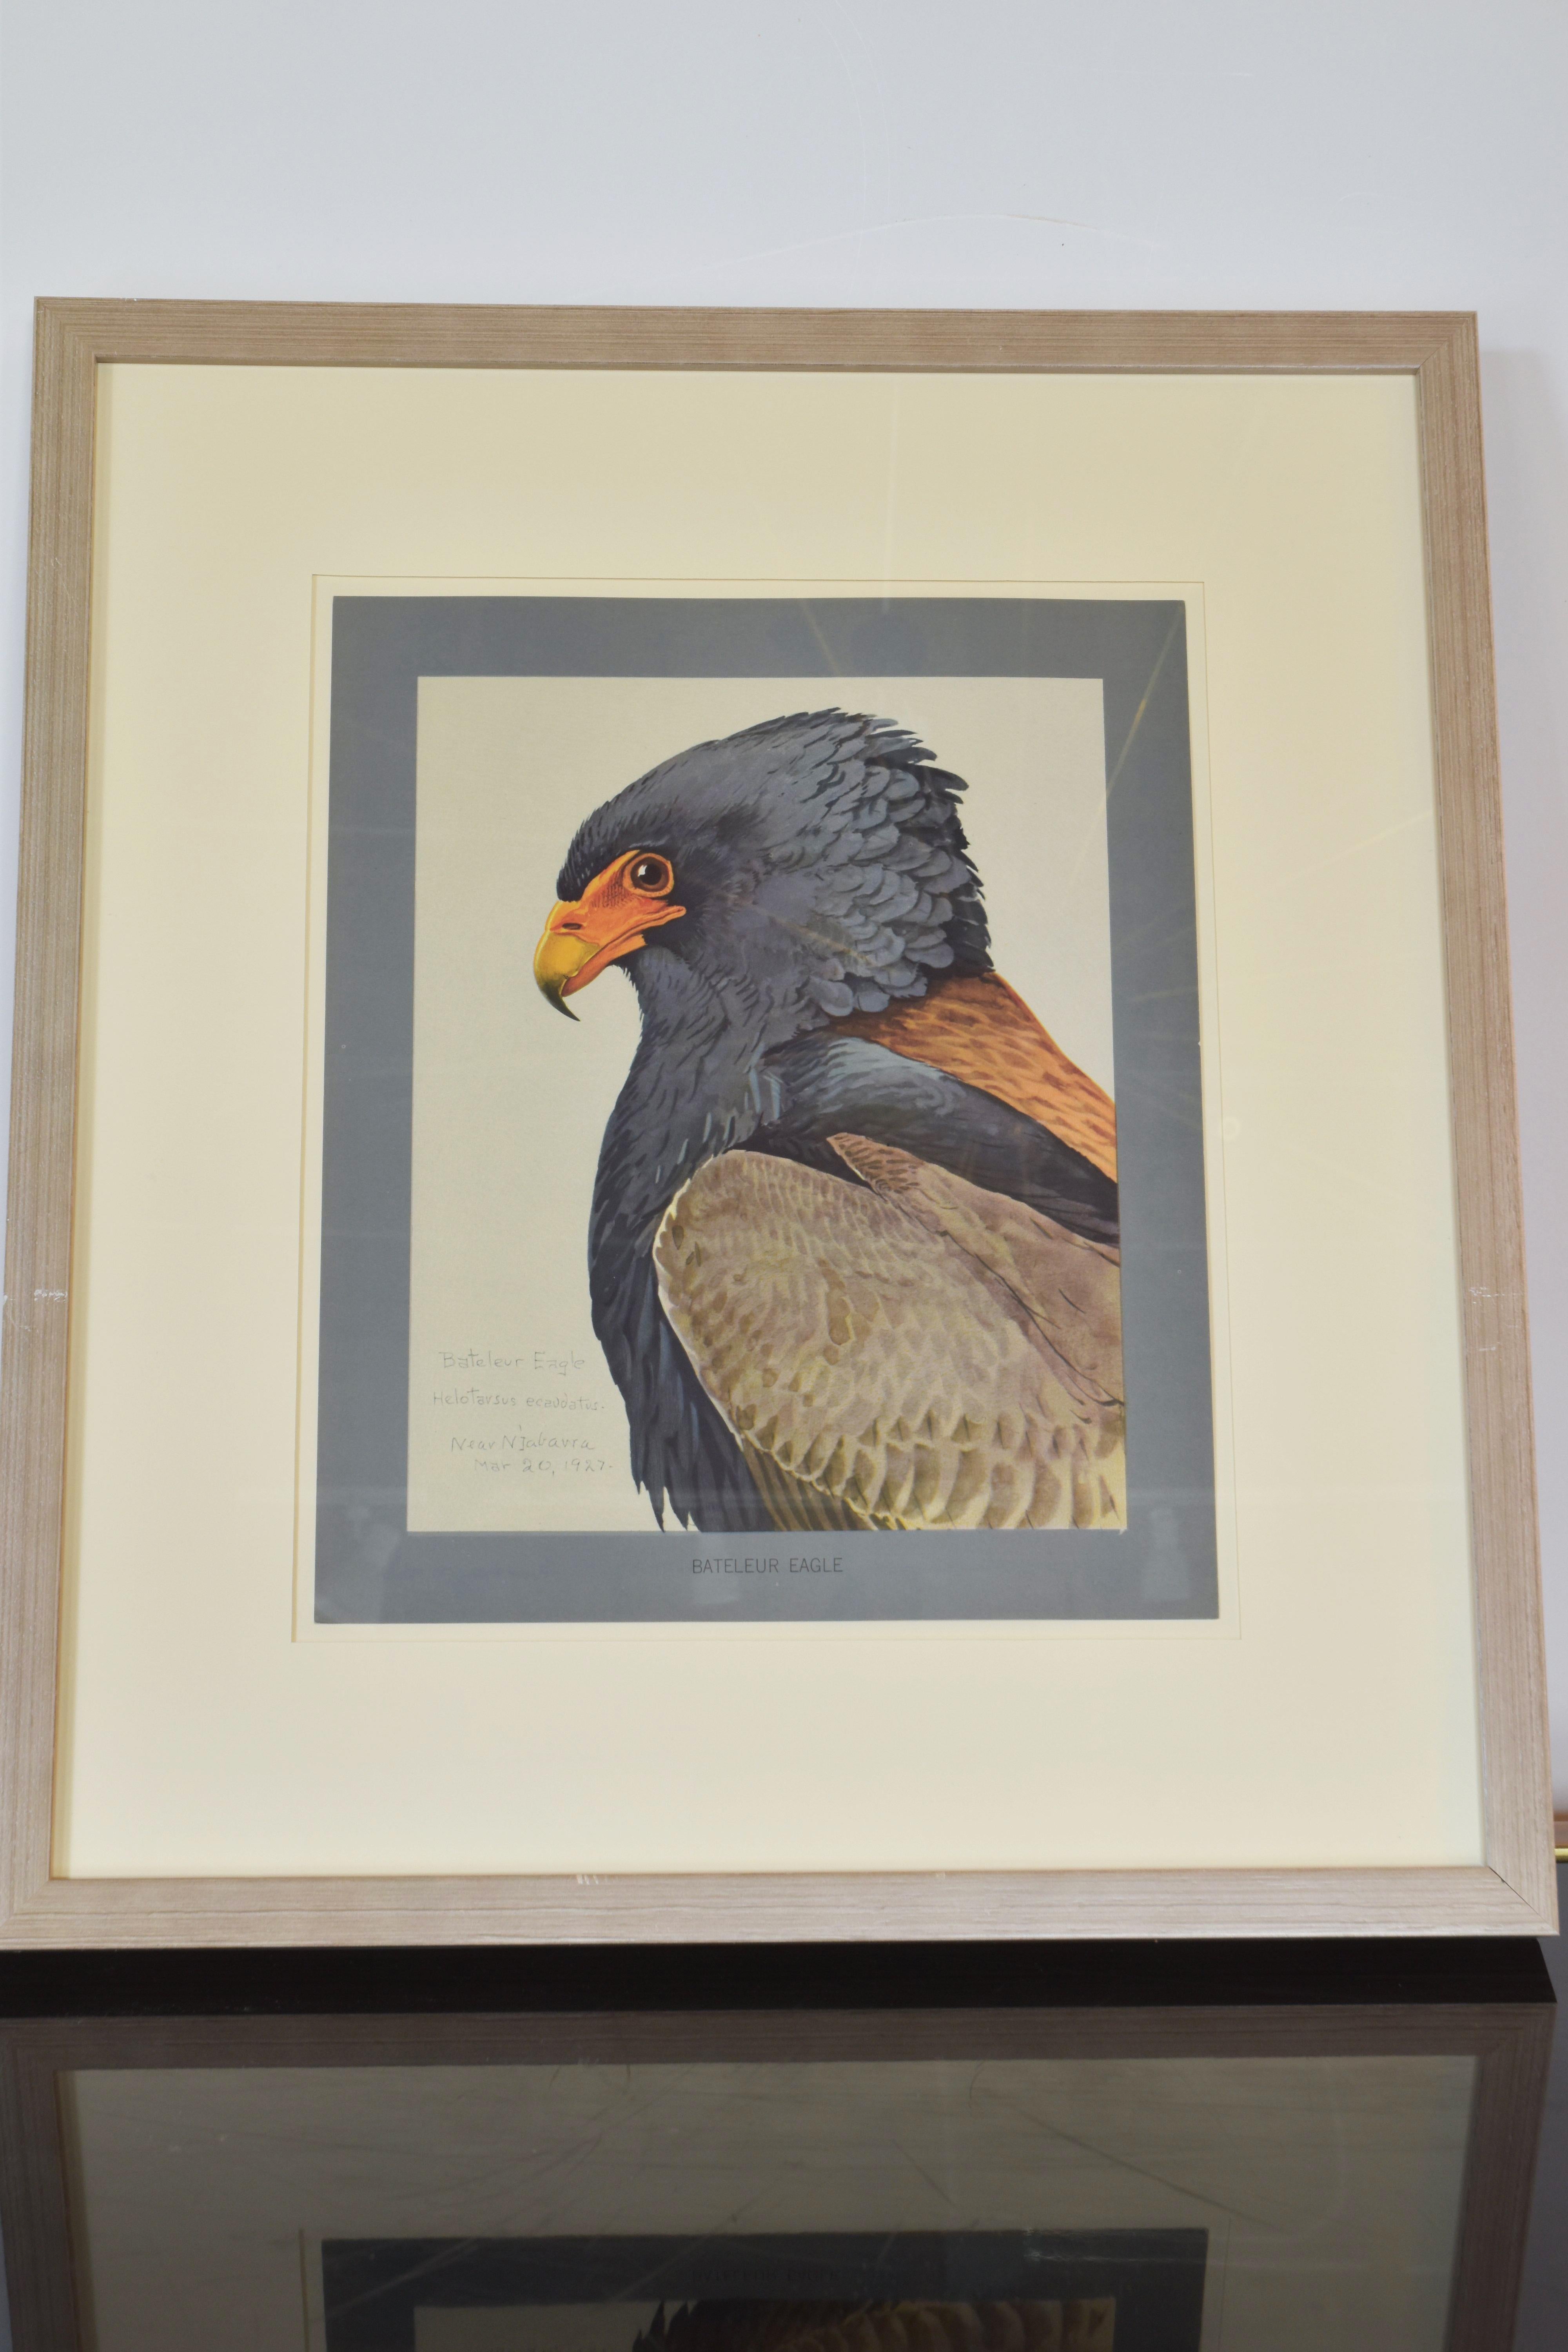 Collection of eight (8) bird prints in a gray washed wood frame with gray and ecru mats.  Crested Hornbill African Tawny Eagle. Gray Plantain Eater. Bateleur Eagle. Egyptian Vulture. Black Bellied Bustard. African Sea Eagle.  These prints are from